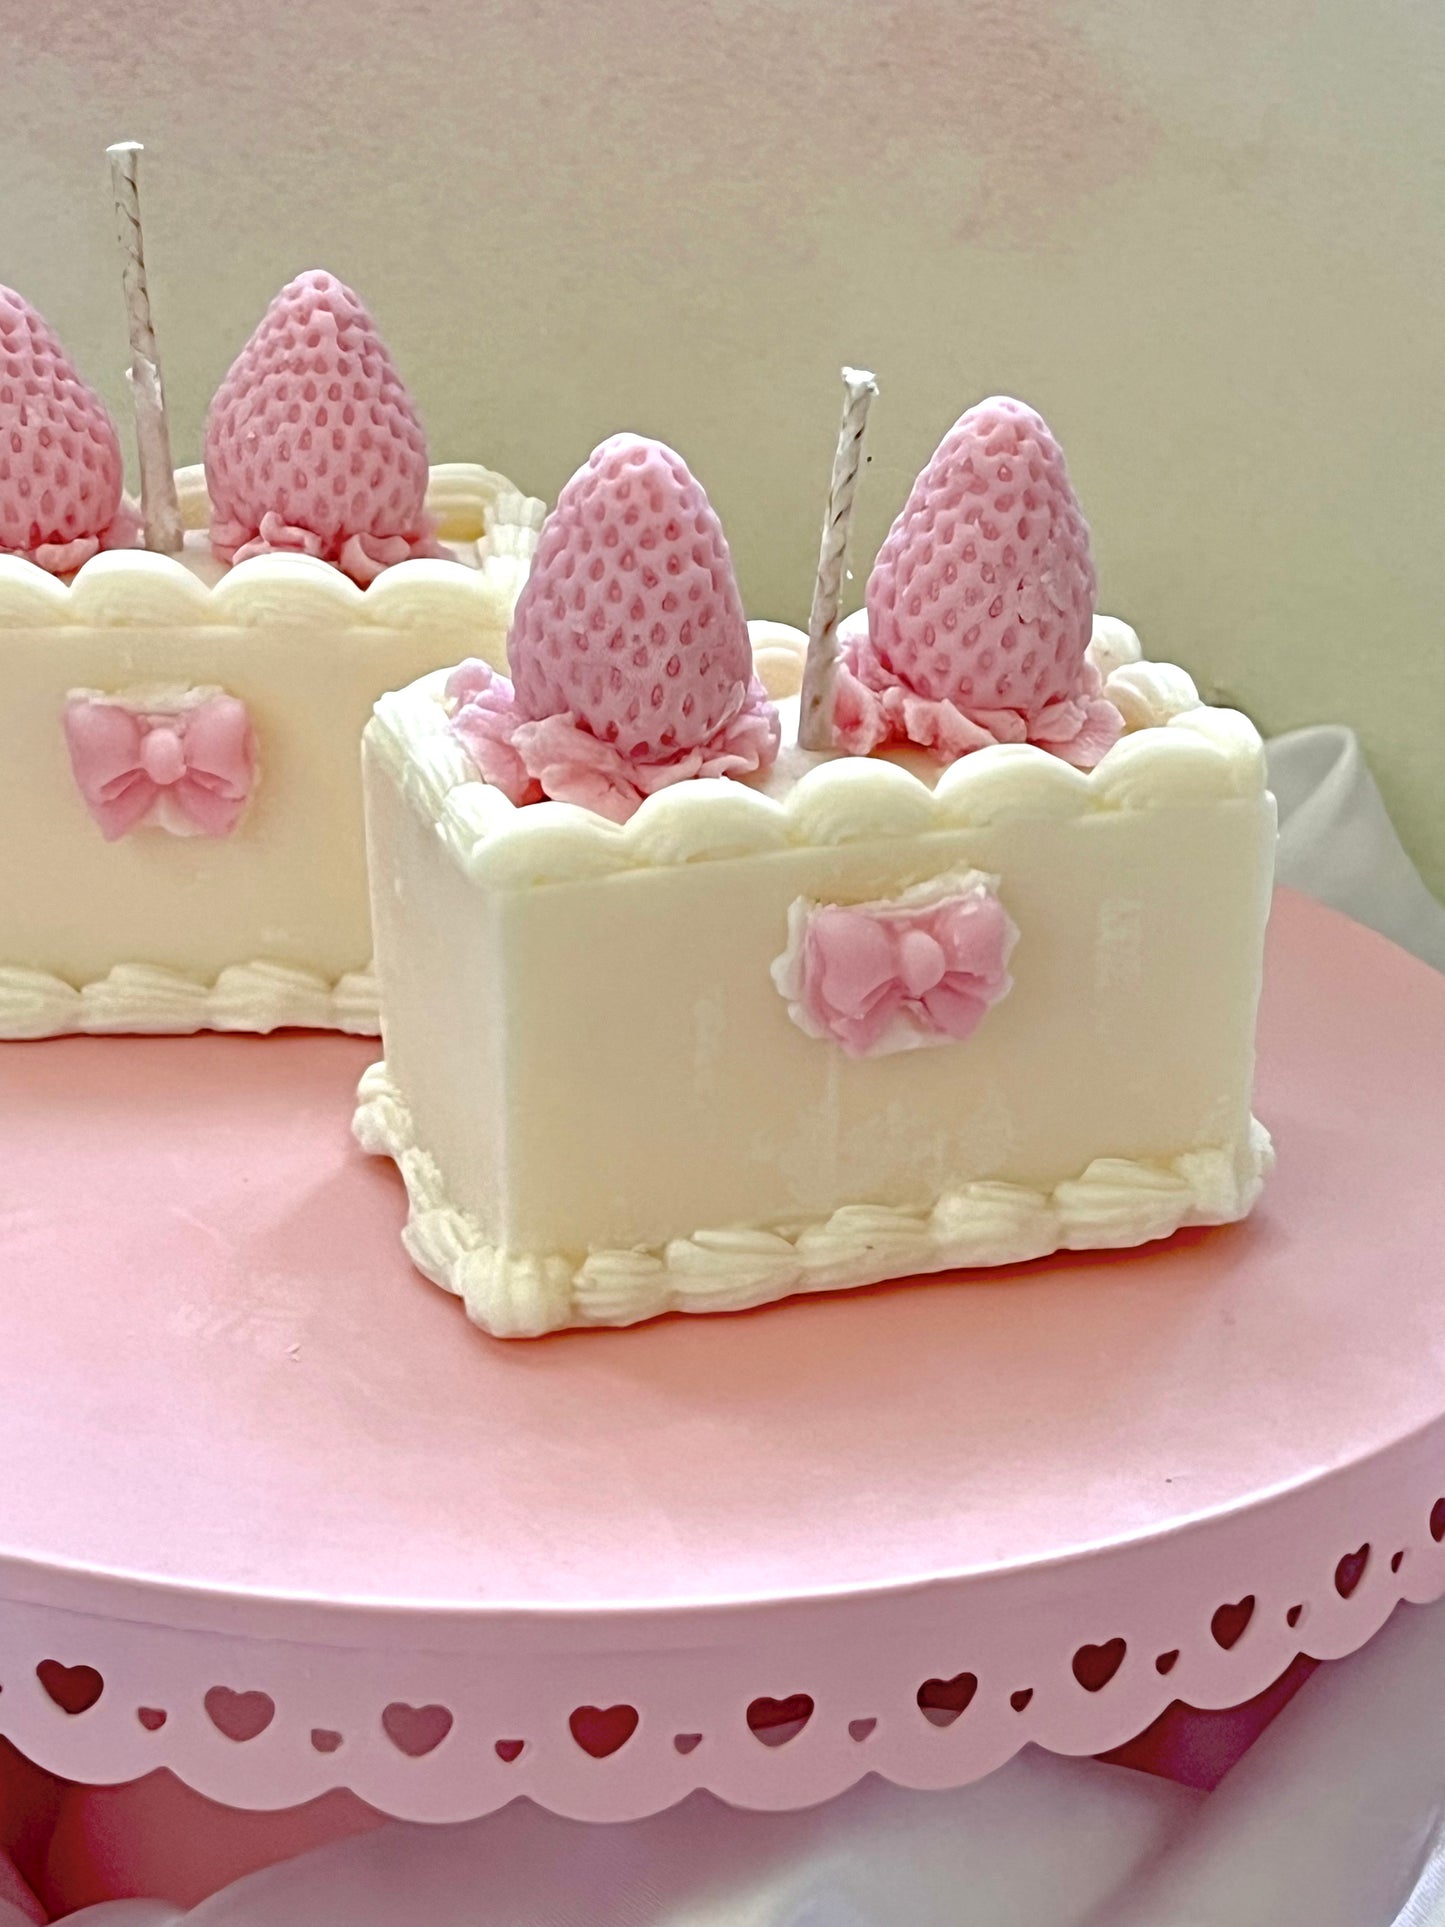 Strawberry Kiwi Frosted Cake with Bow & Strawberries (Discounted)